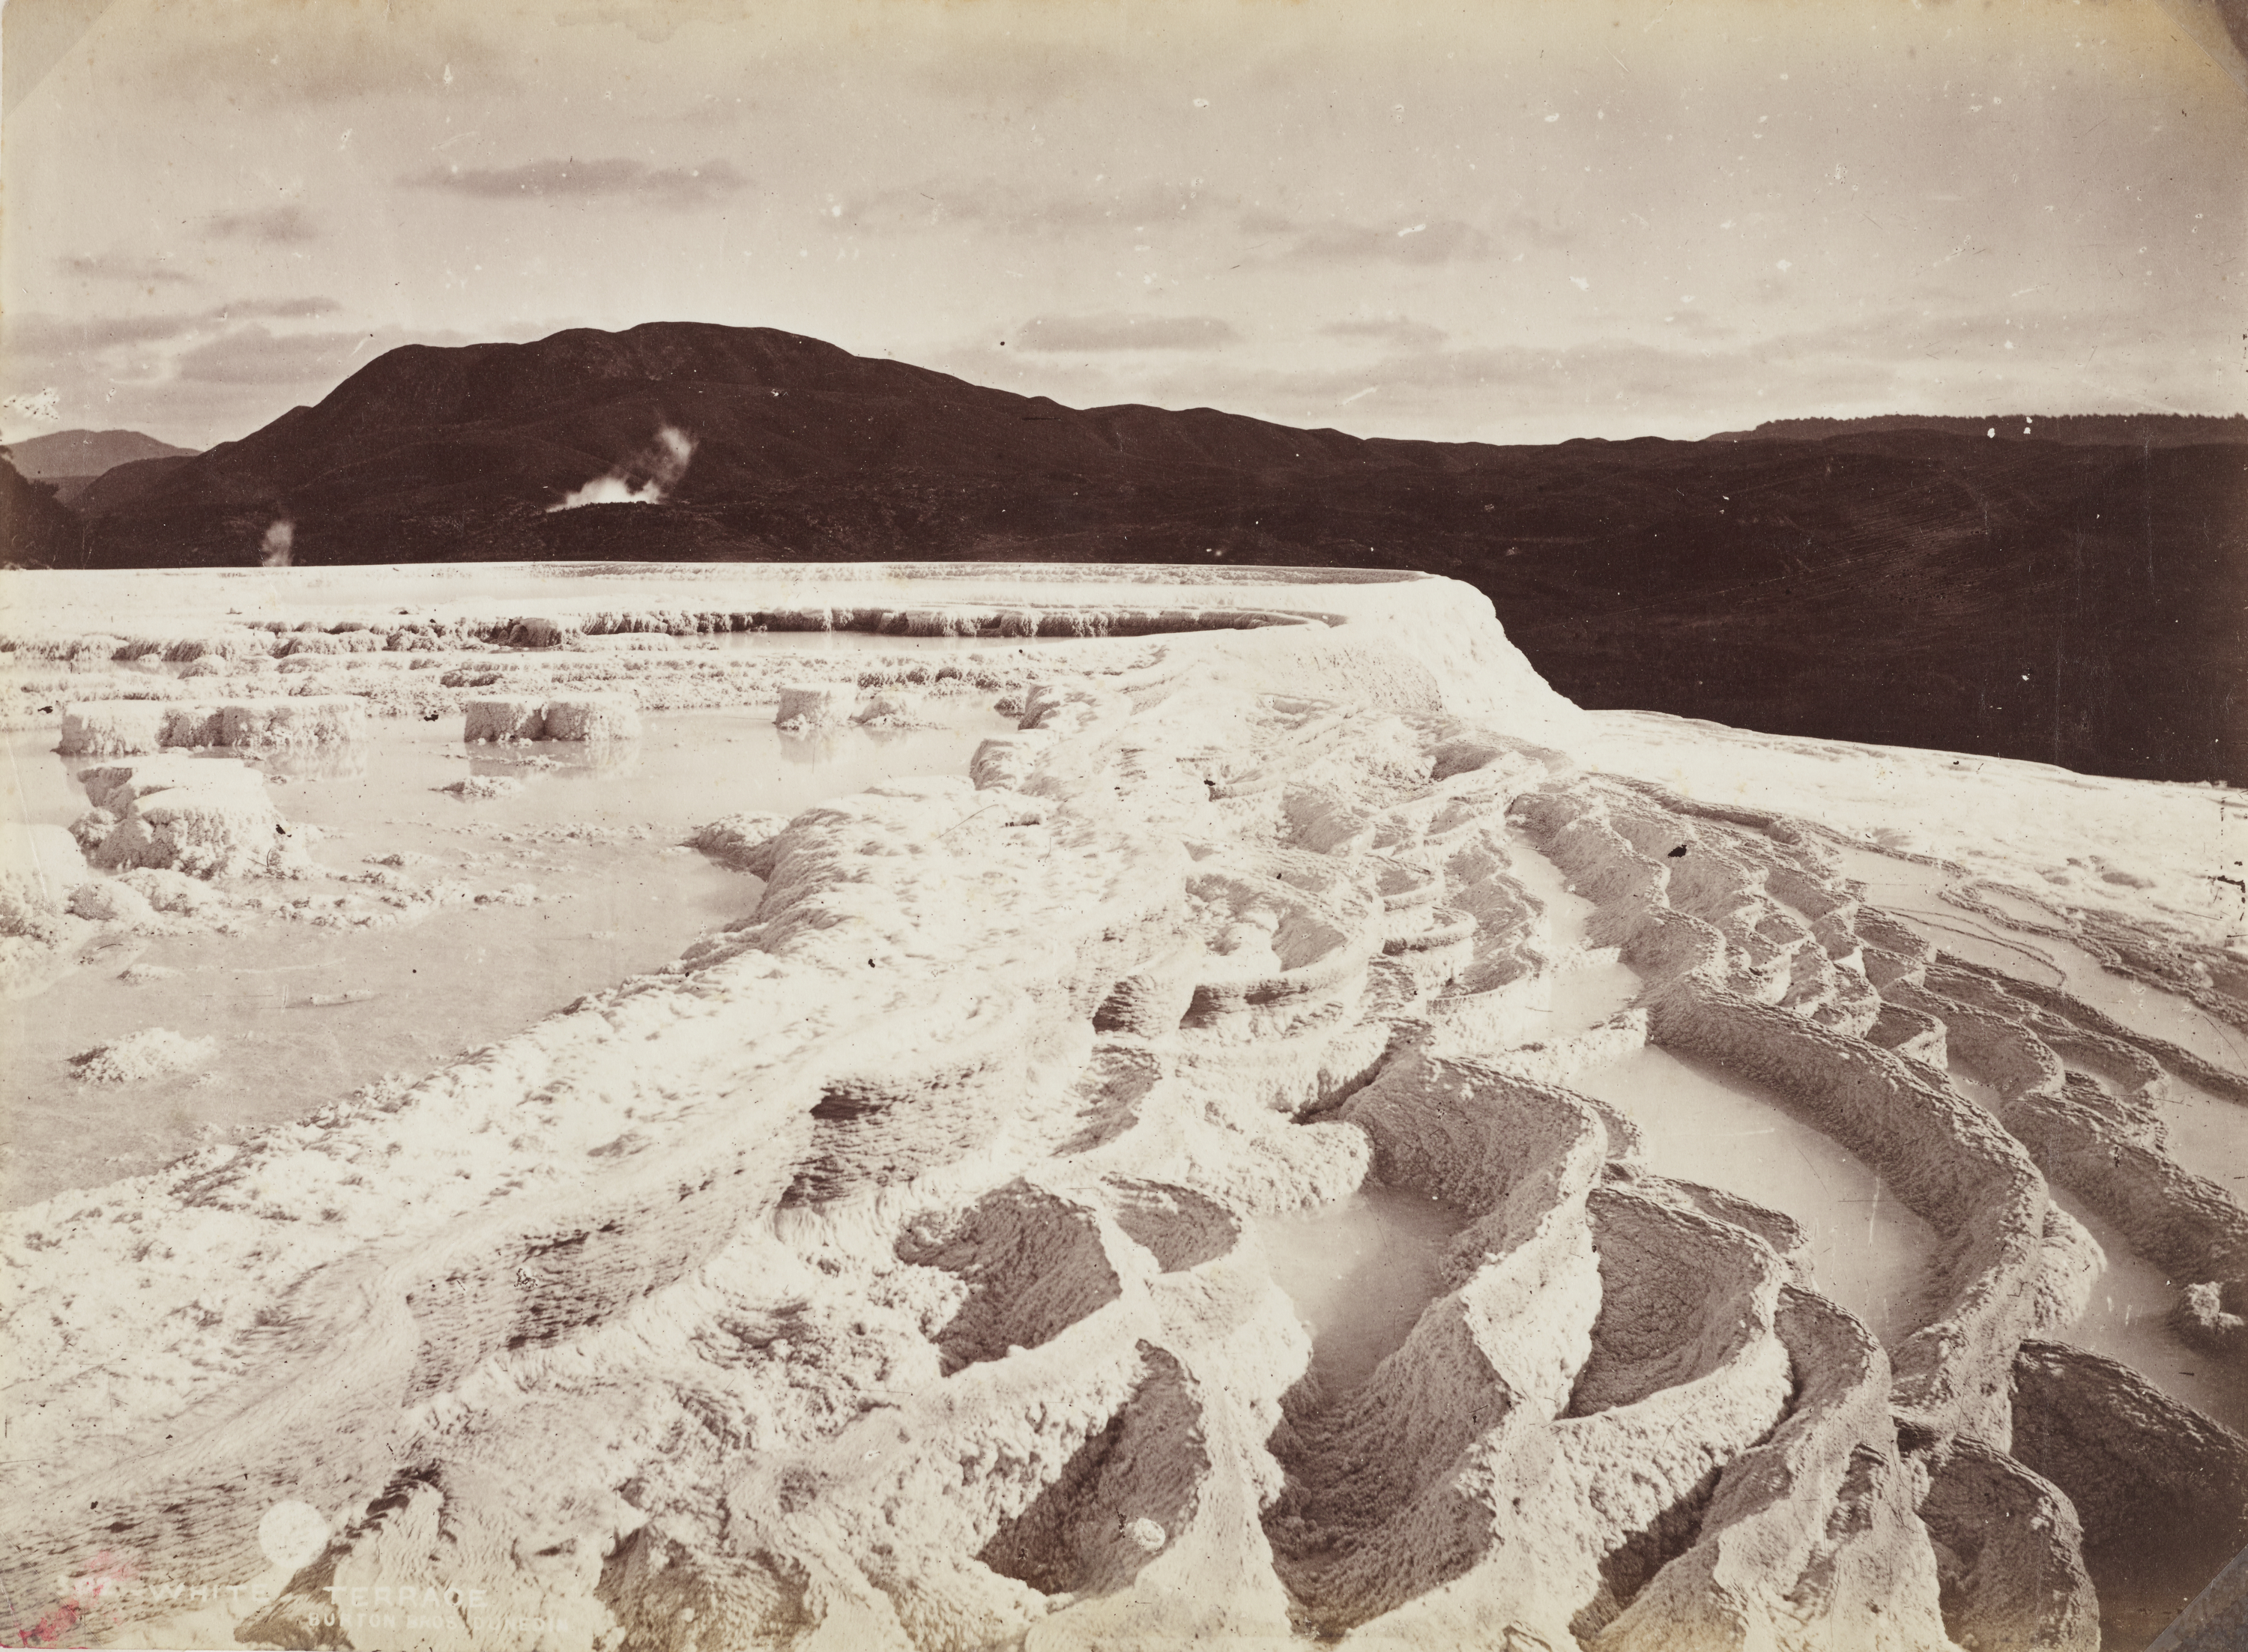 Albumen silver print photograph of the Pink and White Terraces